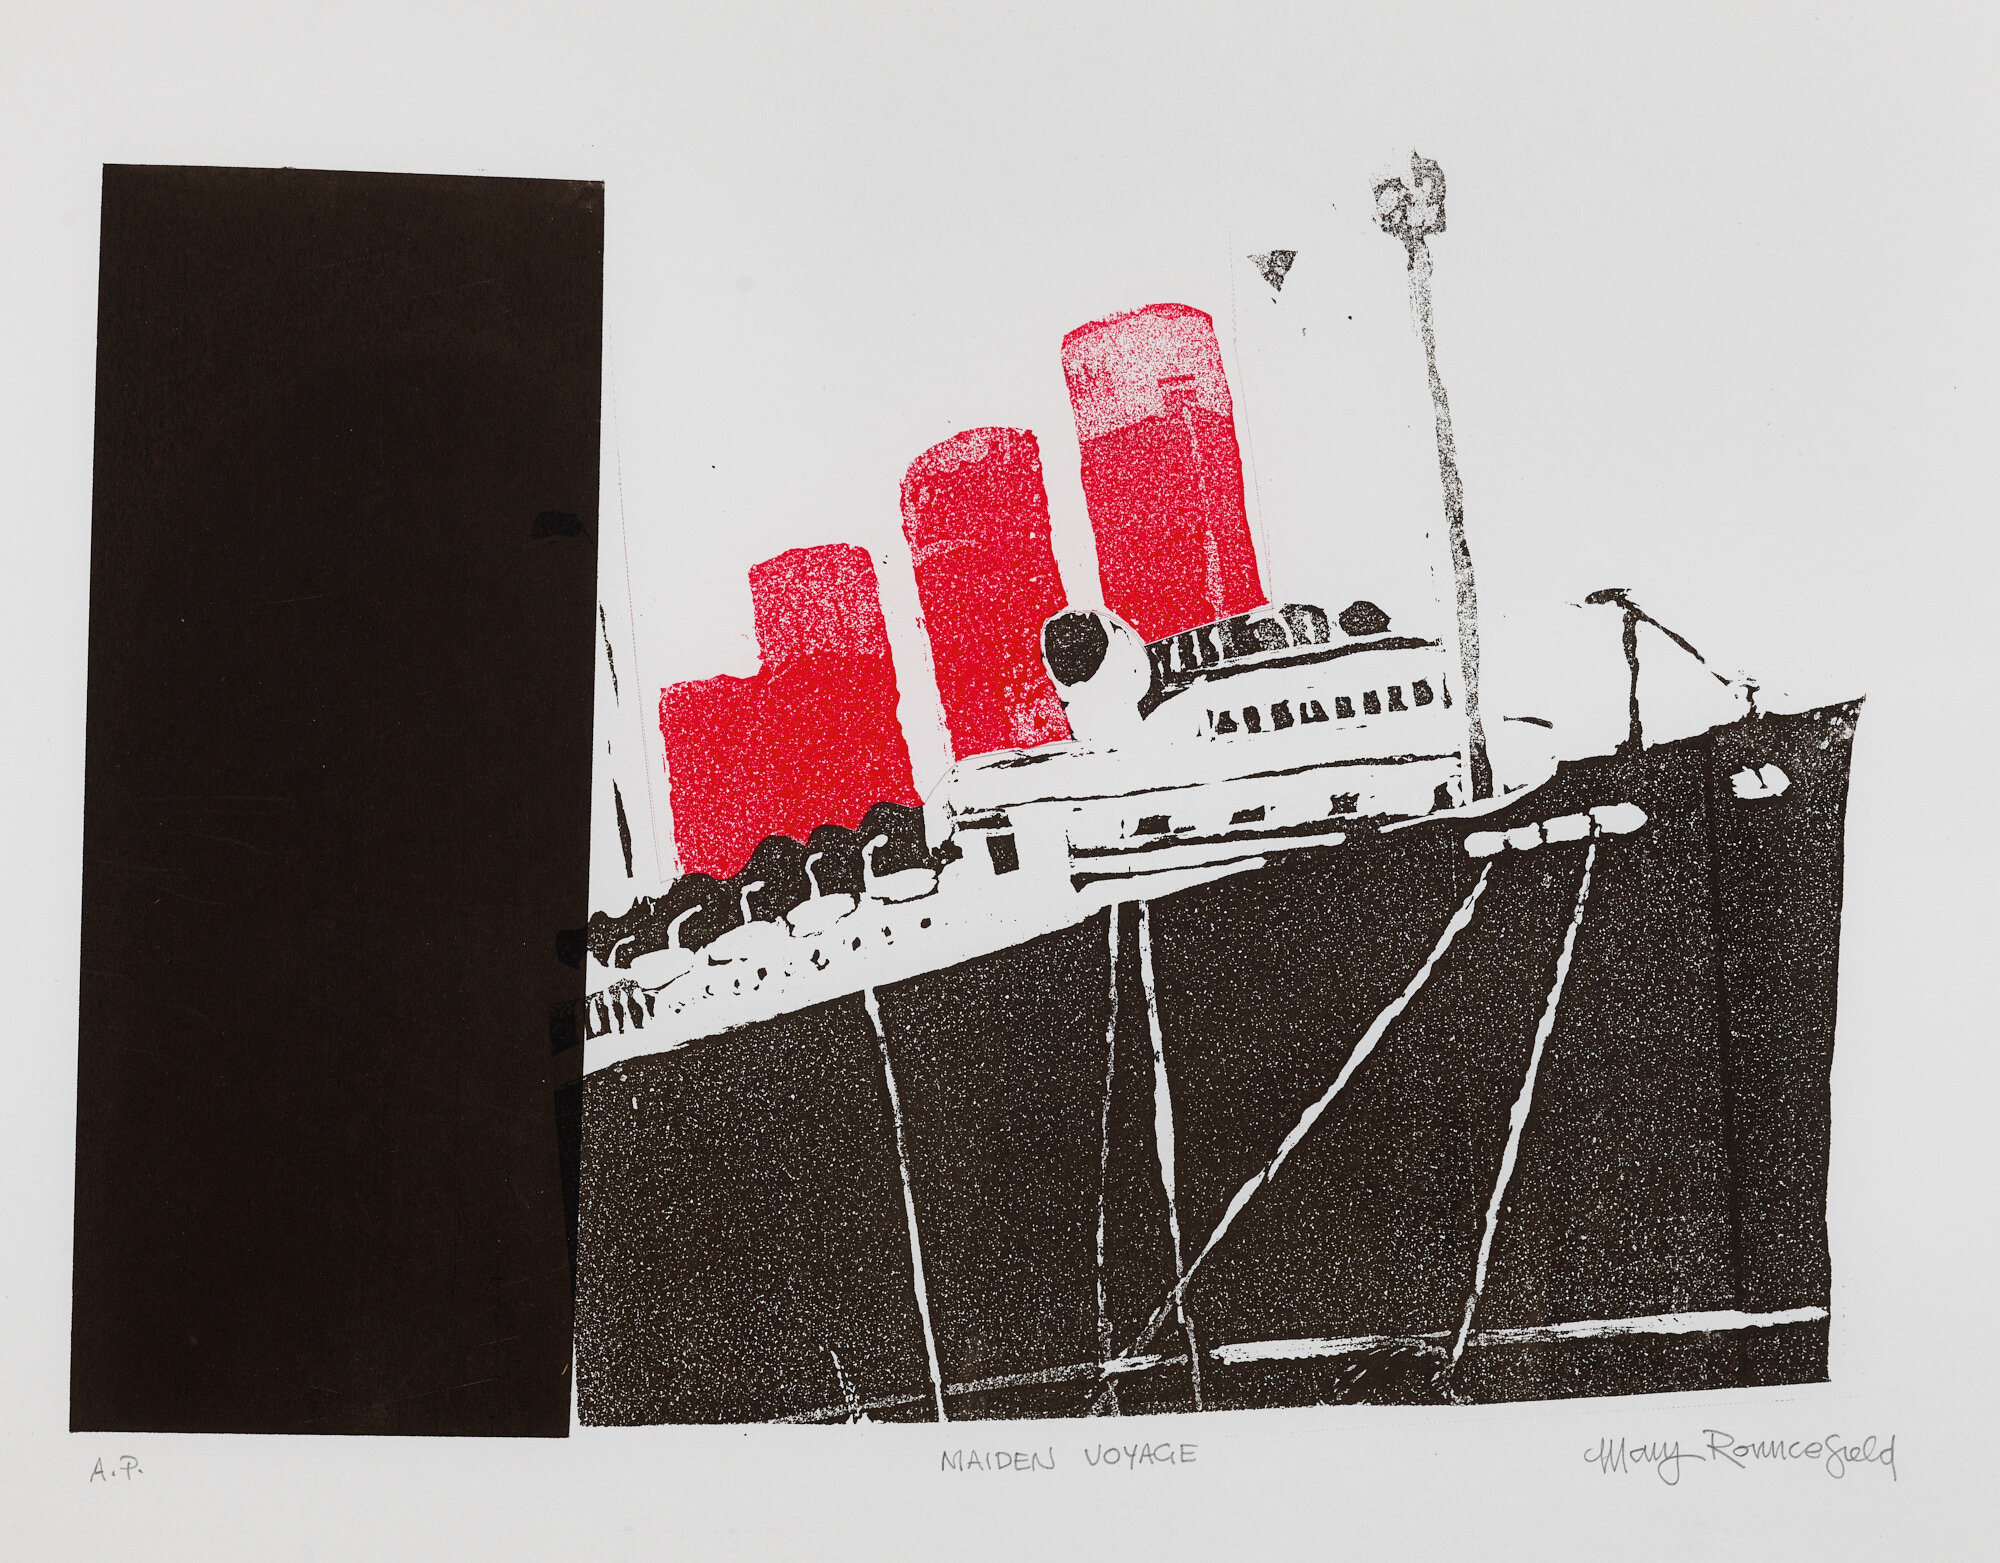  Mary Rouncefield   Maiden Voyage   Screen print, A.P., 2009, 14 ¾” x 18 ½”  